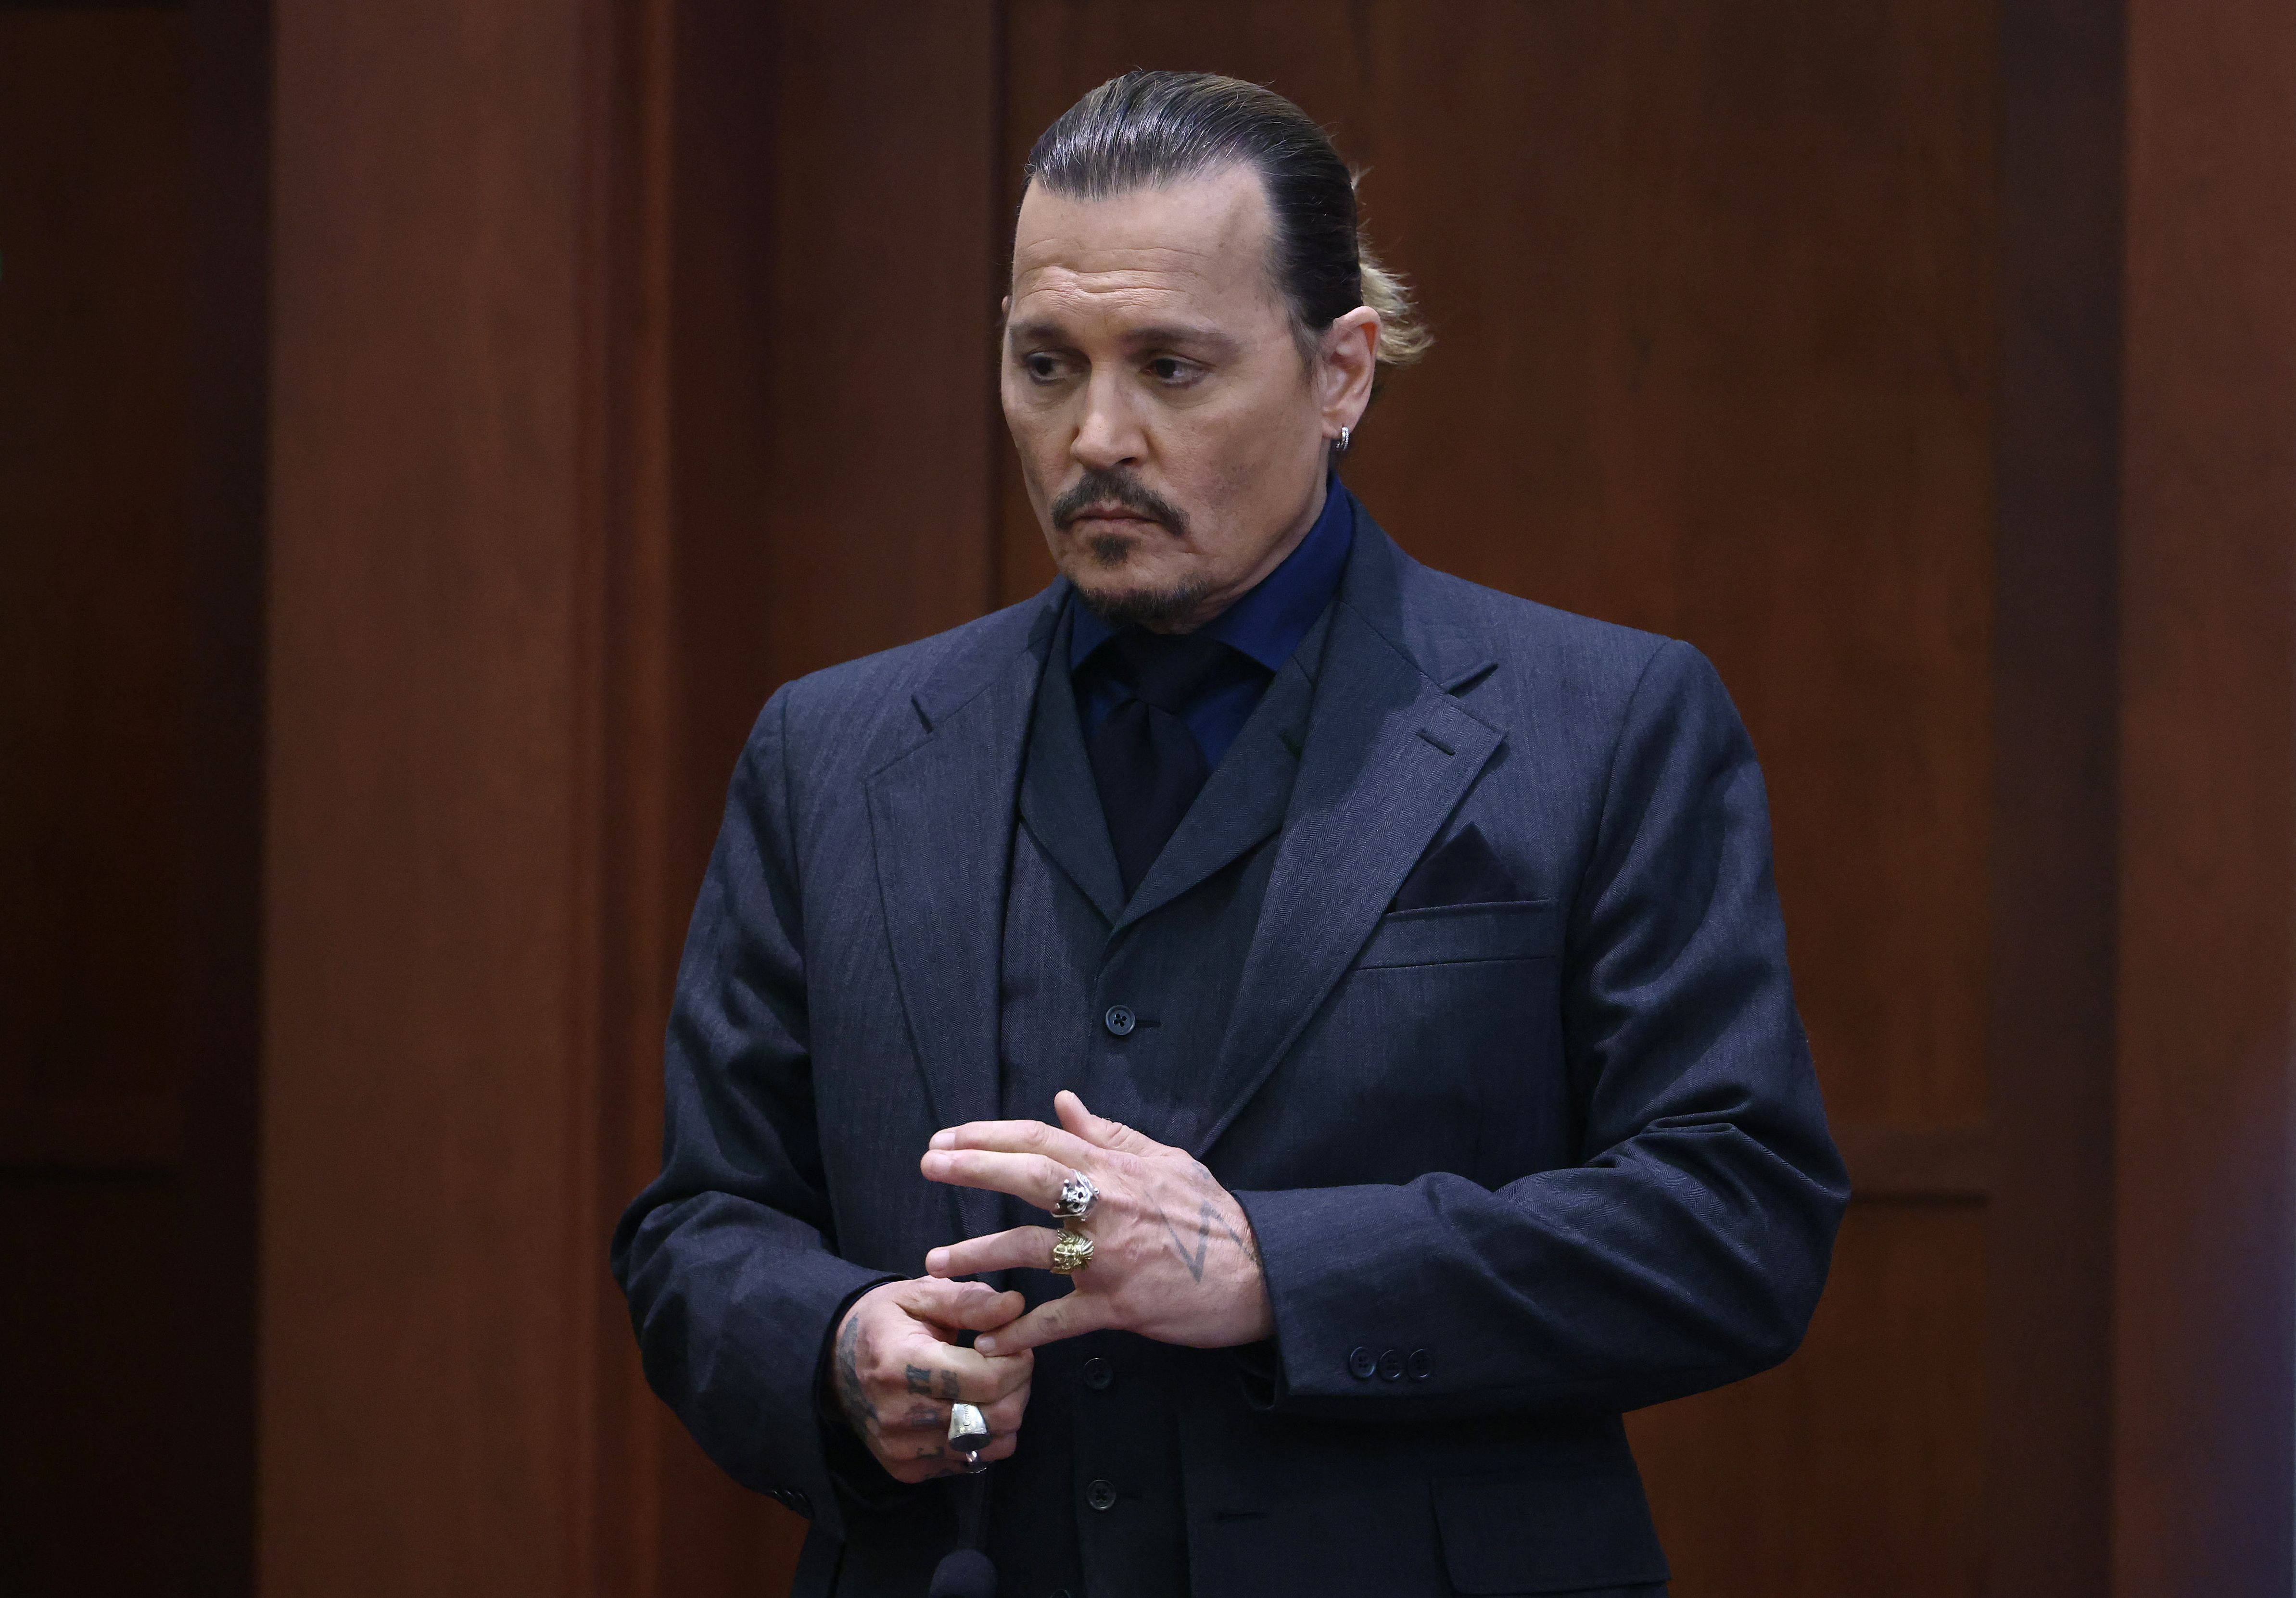 Johnny Depp in the courtroom during the trial with ex-wife Amber Heard.